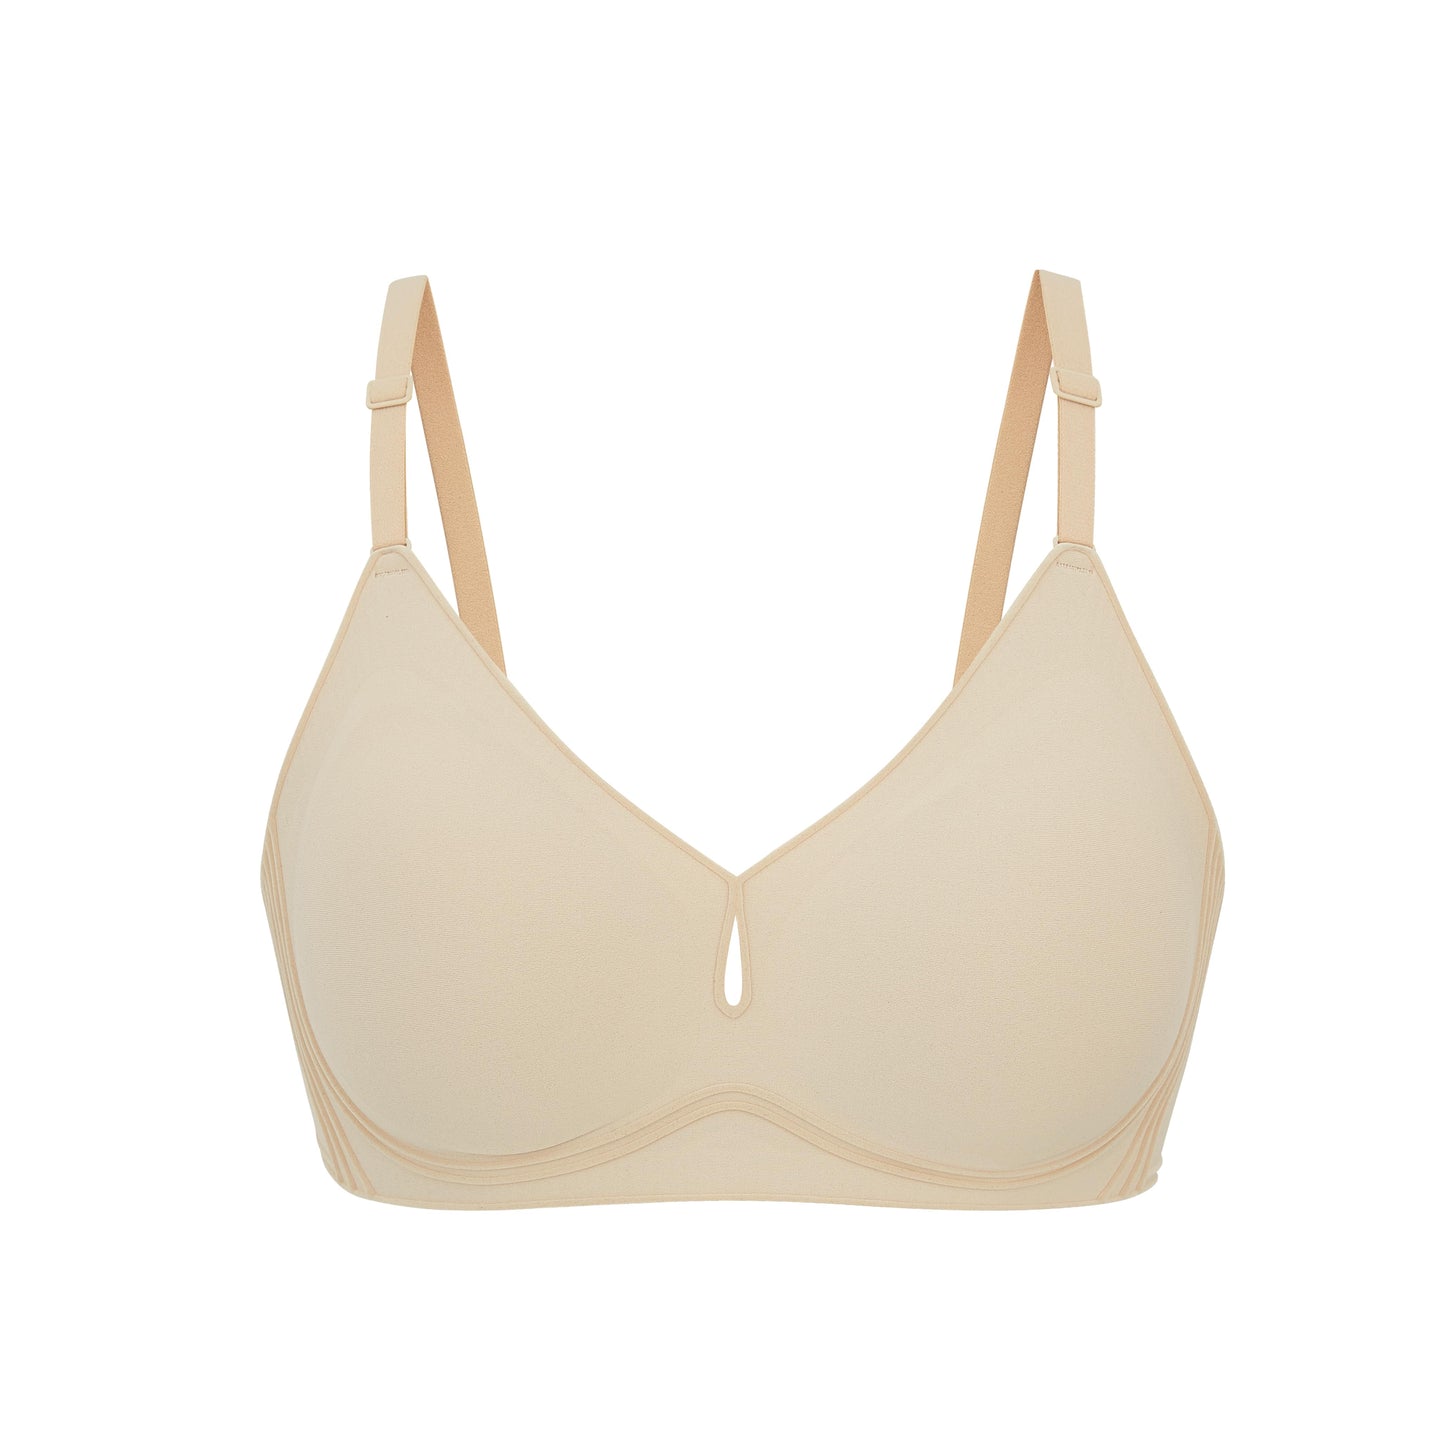 Flat lay image of beige bra with plunge neckline and center cutout